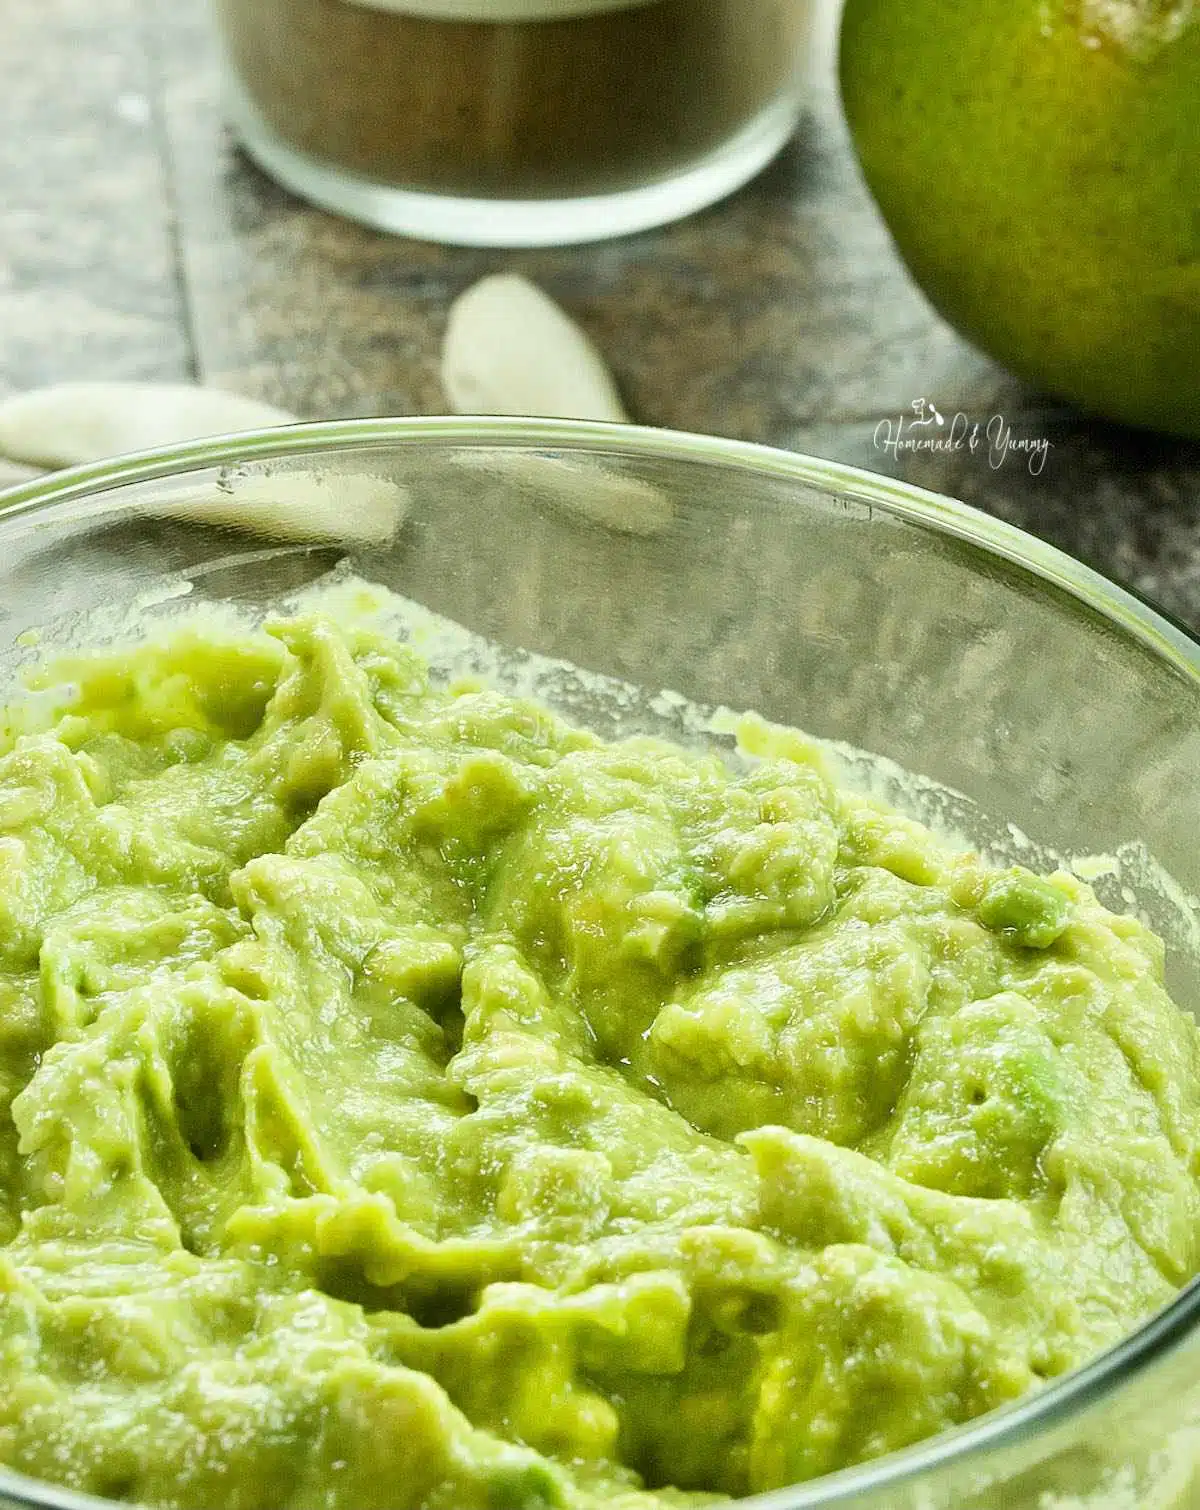 A bowl of fresh made guacamole ready to use.